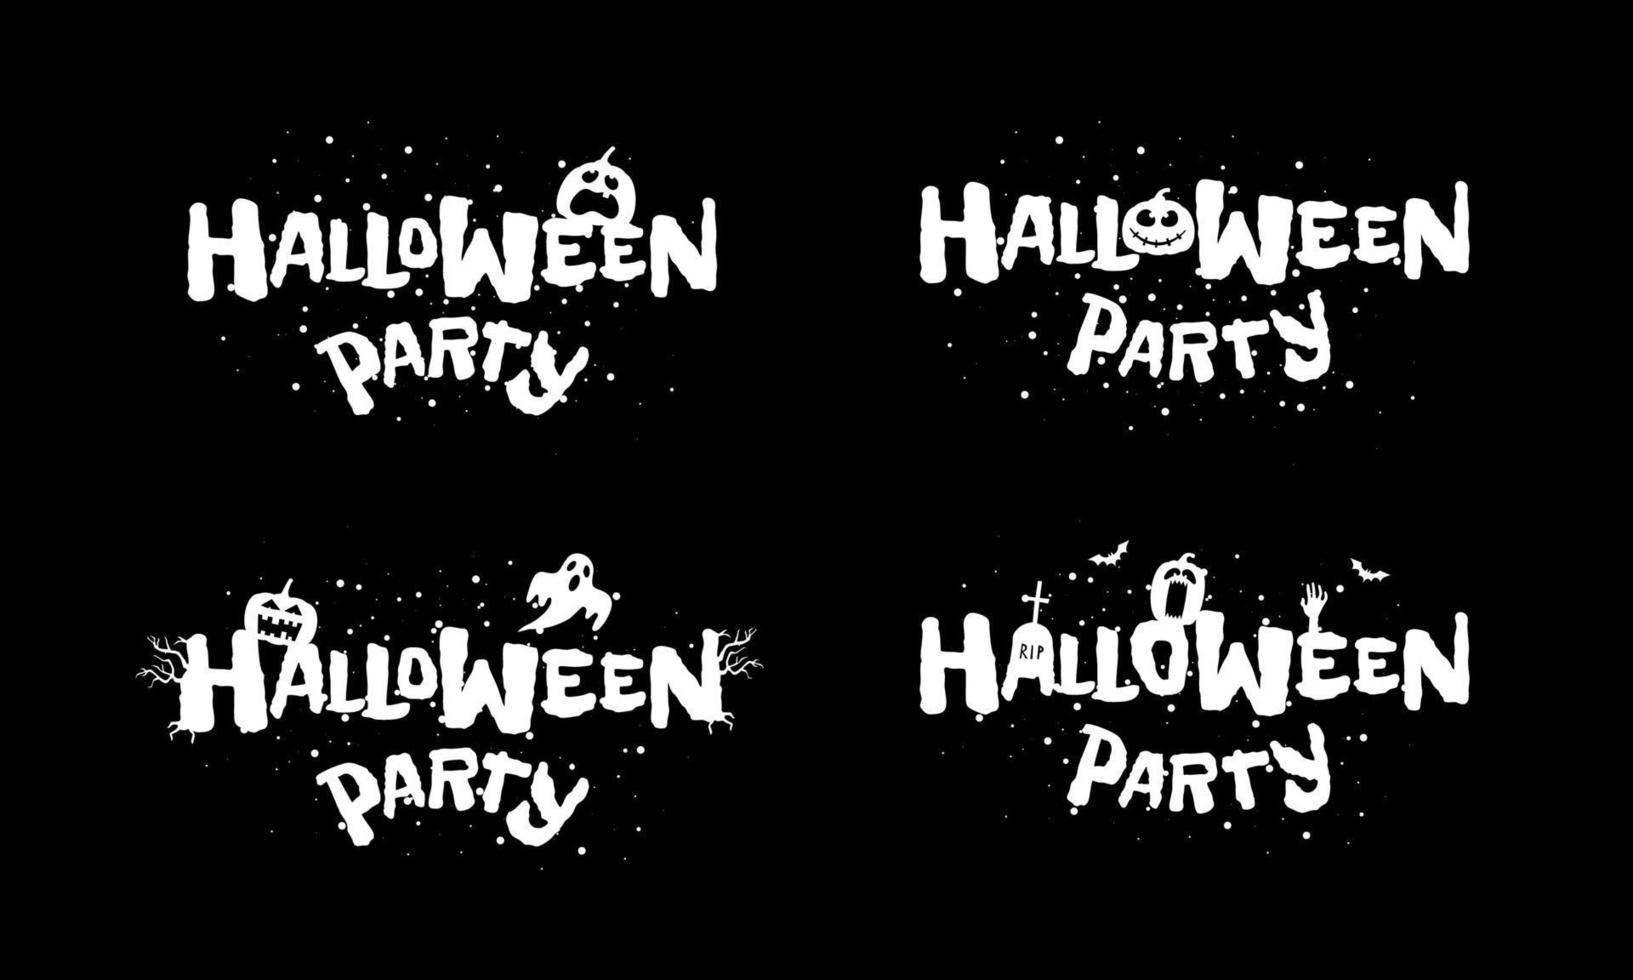 Happy Halloween party holiday hand drawn lettering design vector